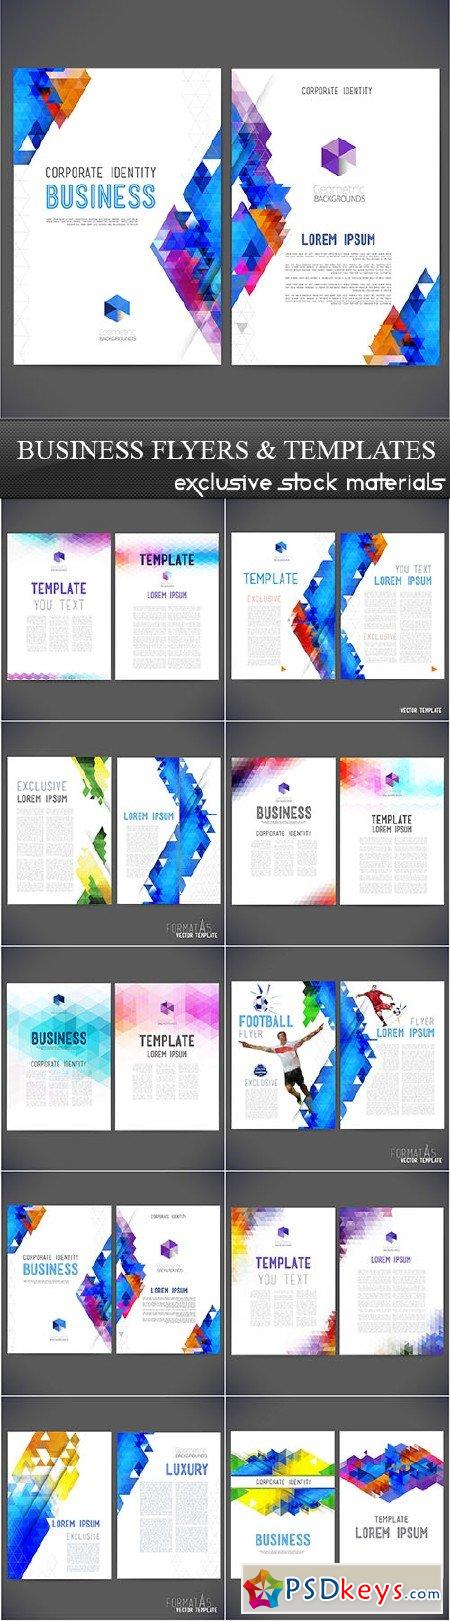 Business Flyers and Templates 10xEPS